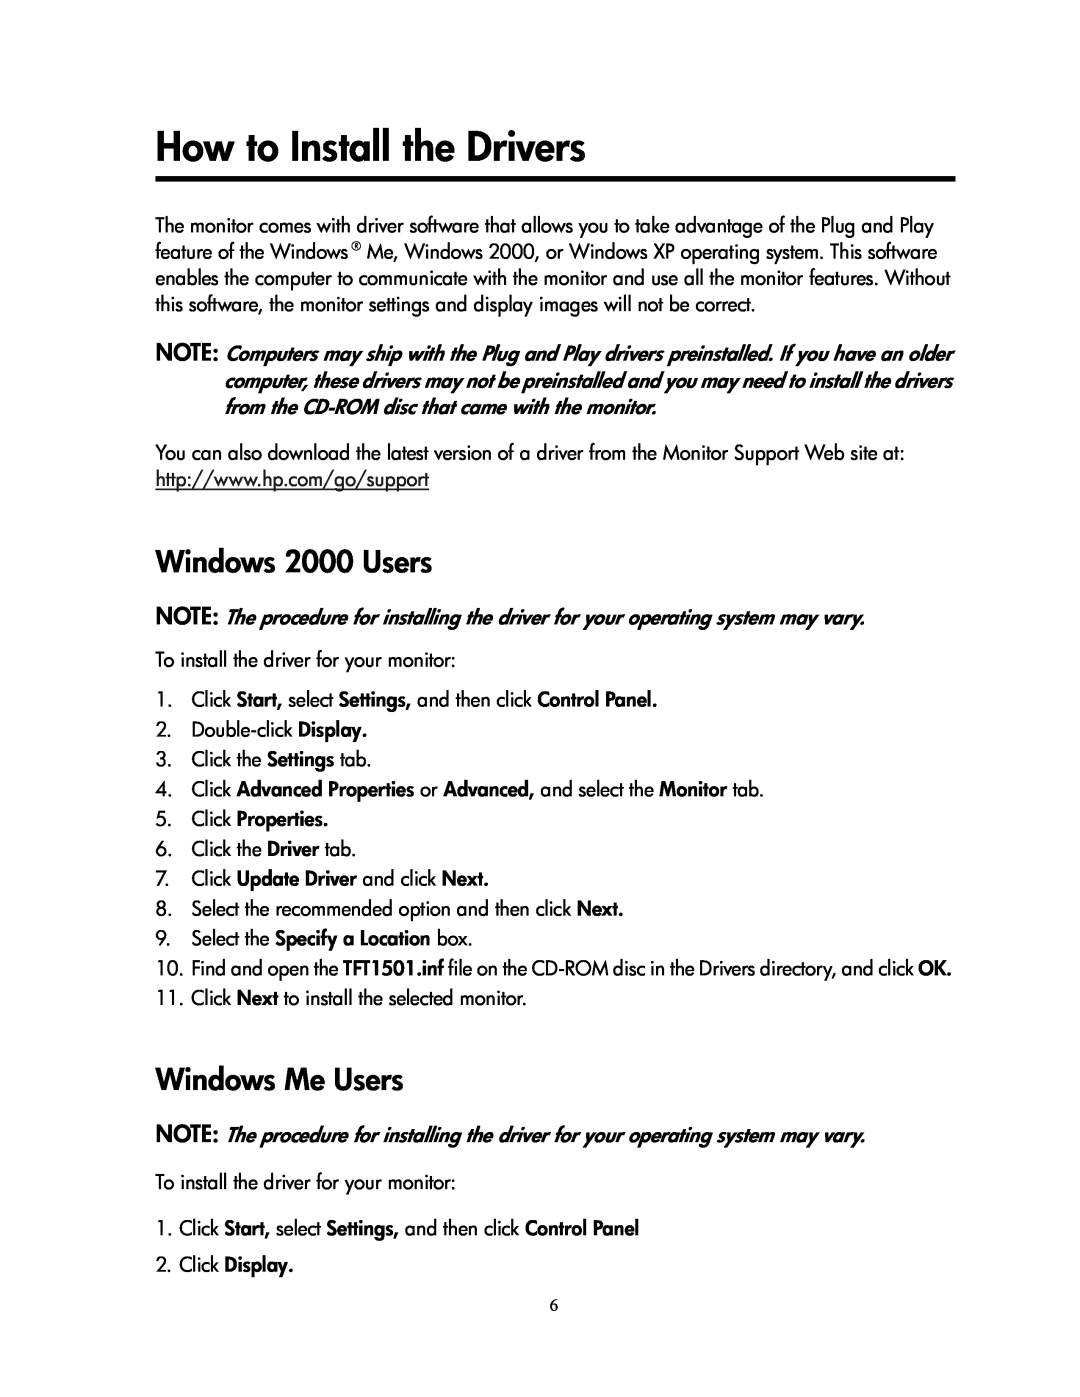 Compaq 1501 manual How to Install the Drivers, Windows 2000 Users, Windows Me Users 